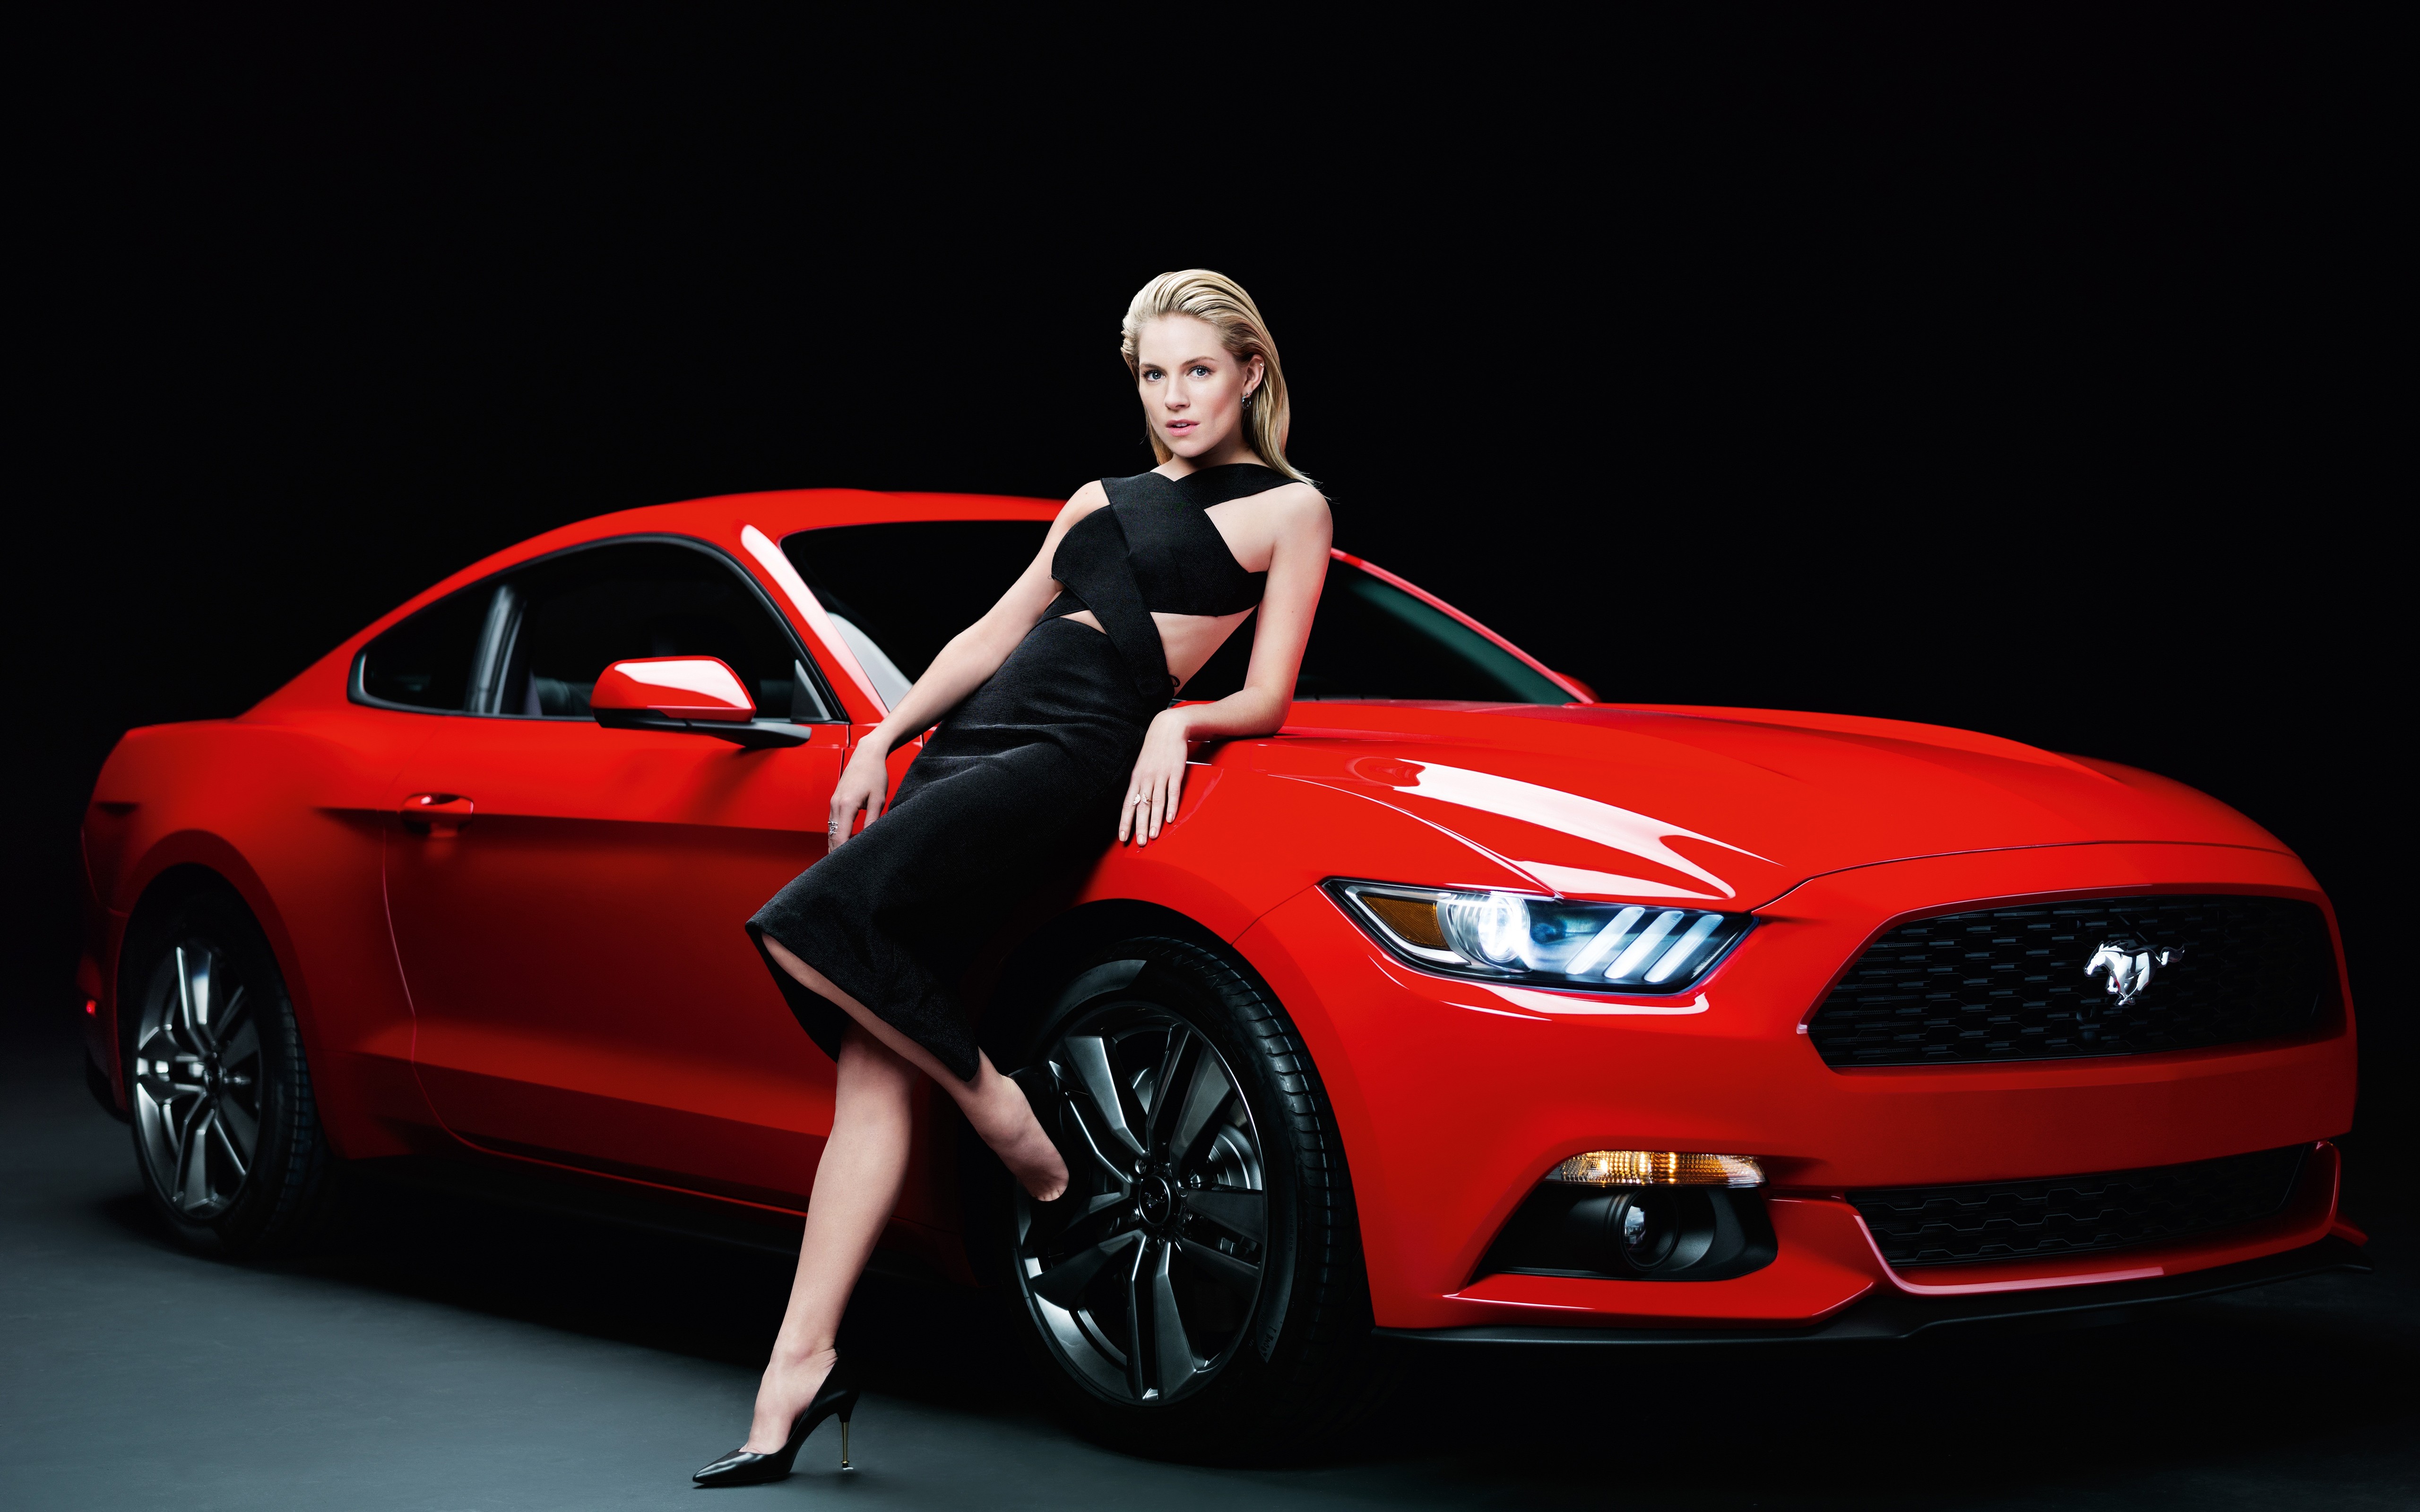 People 5120x3200 Ford Mustang car vehicle muscle cars Sienna Miller actress celebrity women simple background high heels Ford Ford Mustang S550